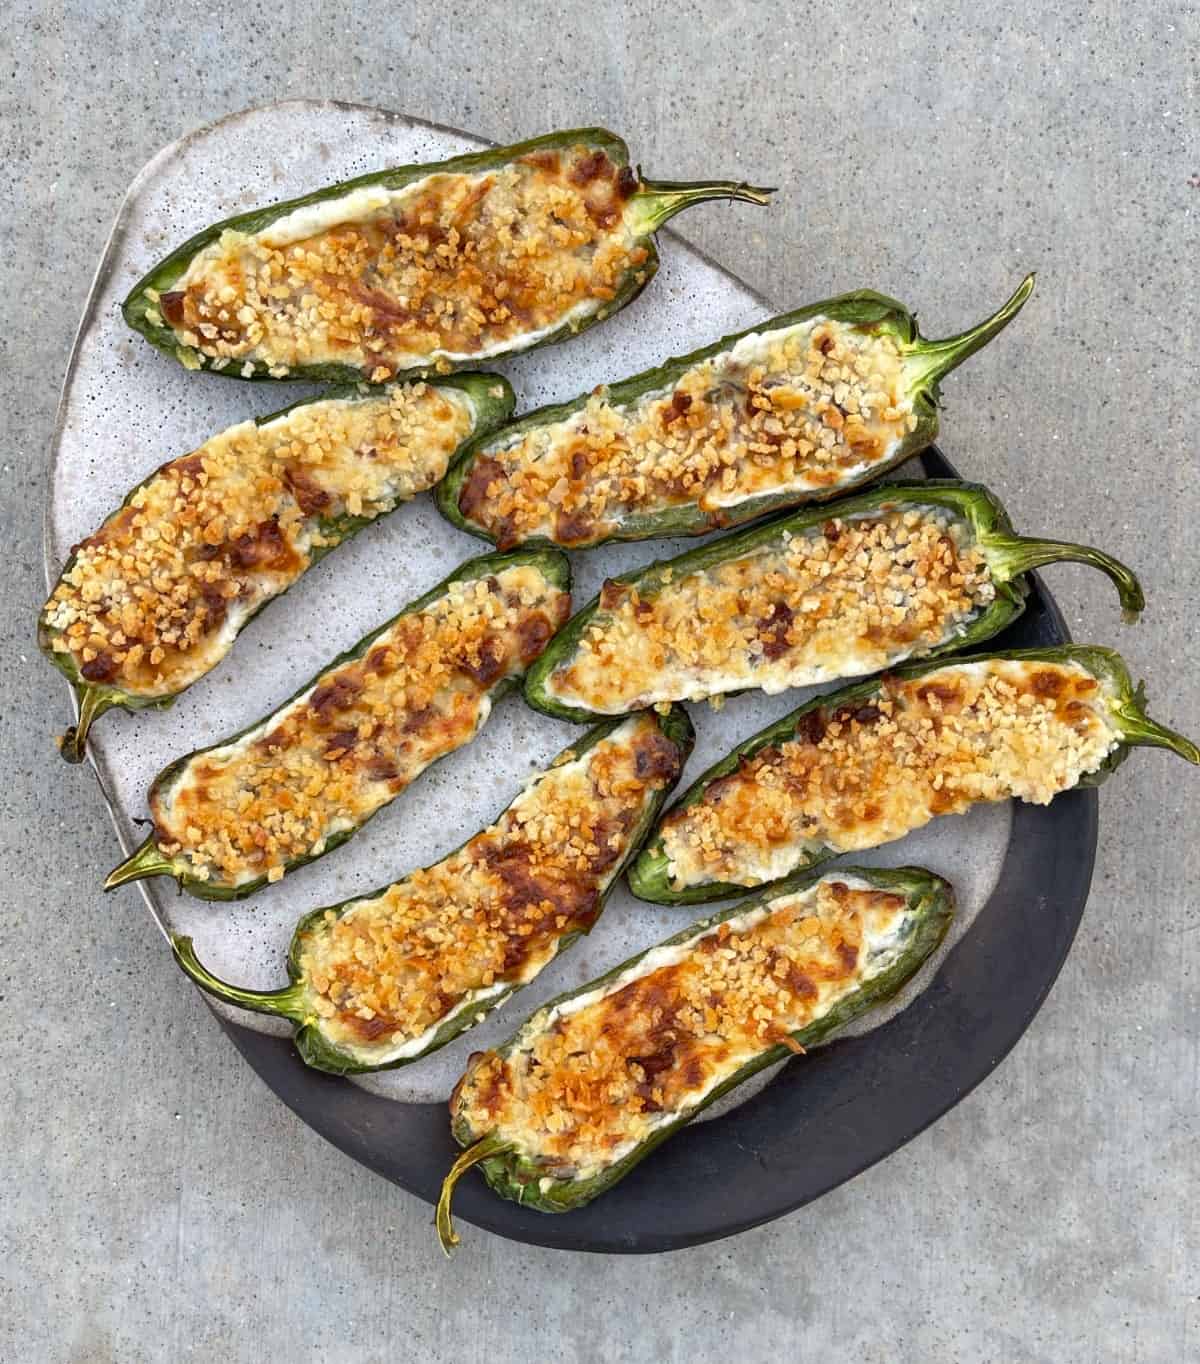 Open-face air fried jalapeno poppers on ceramic serving plate.